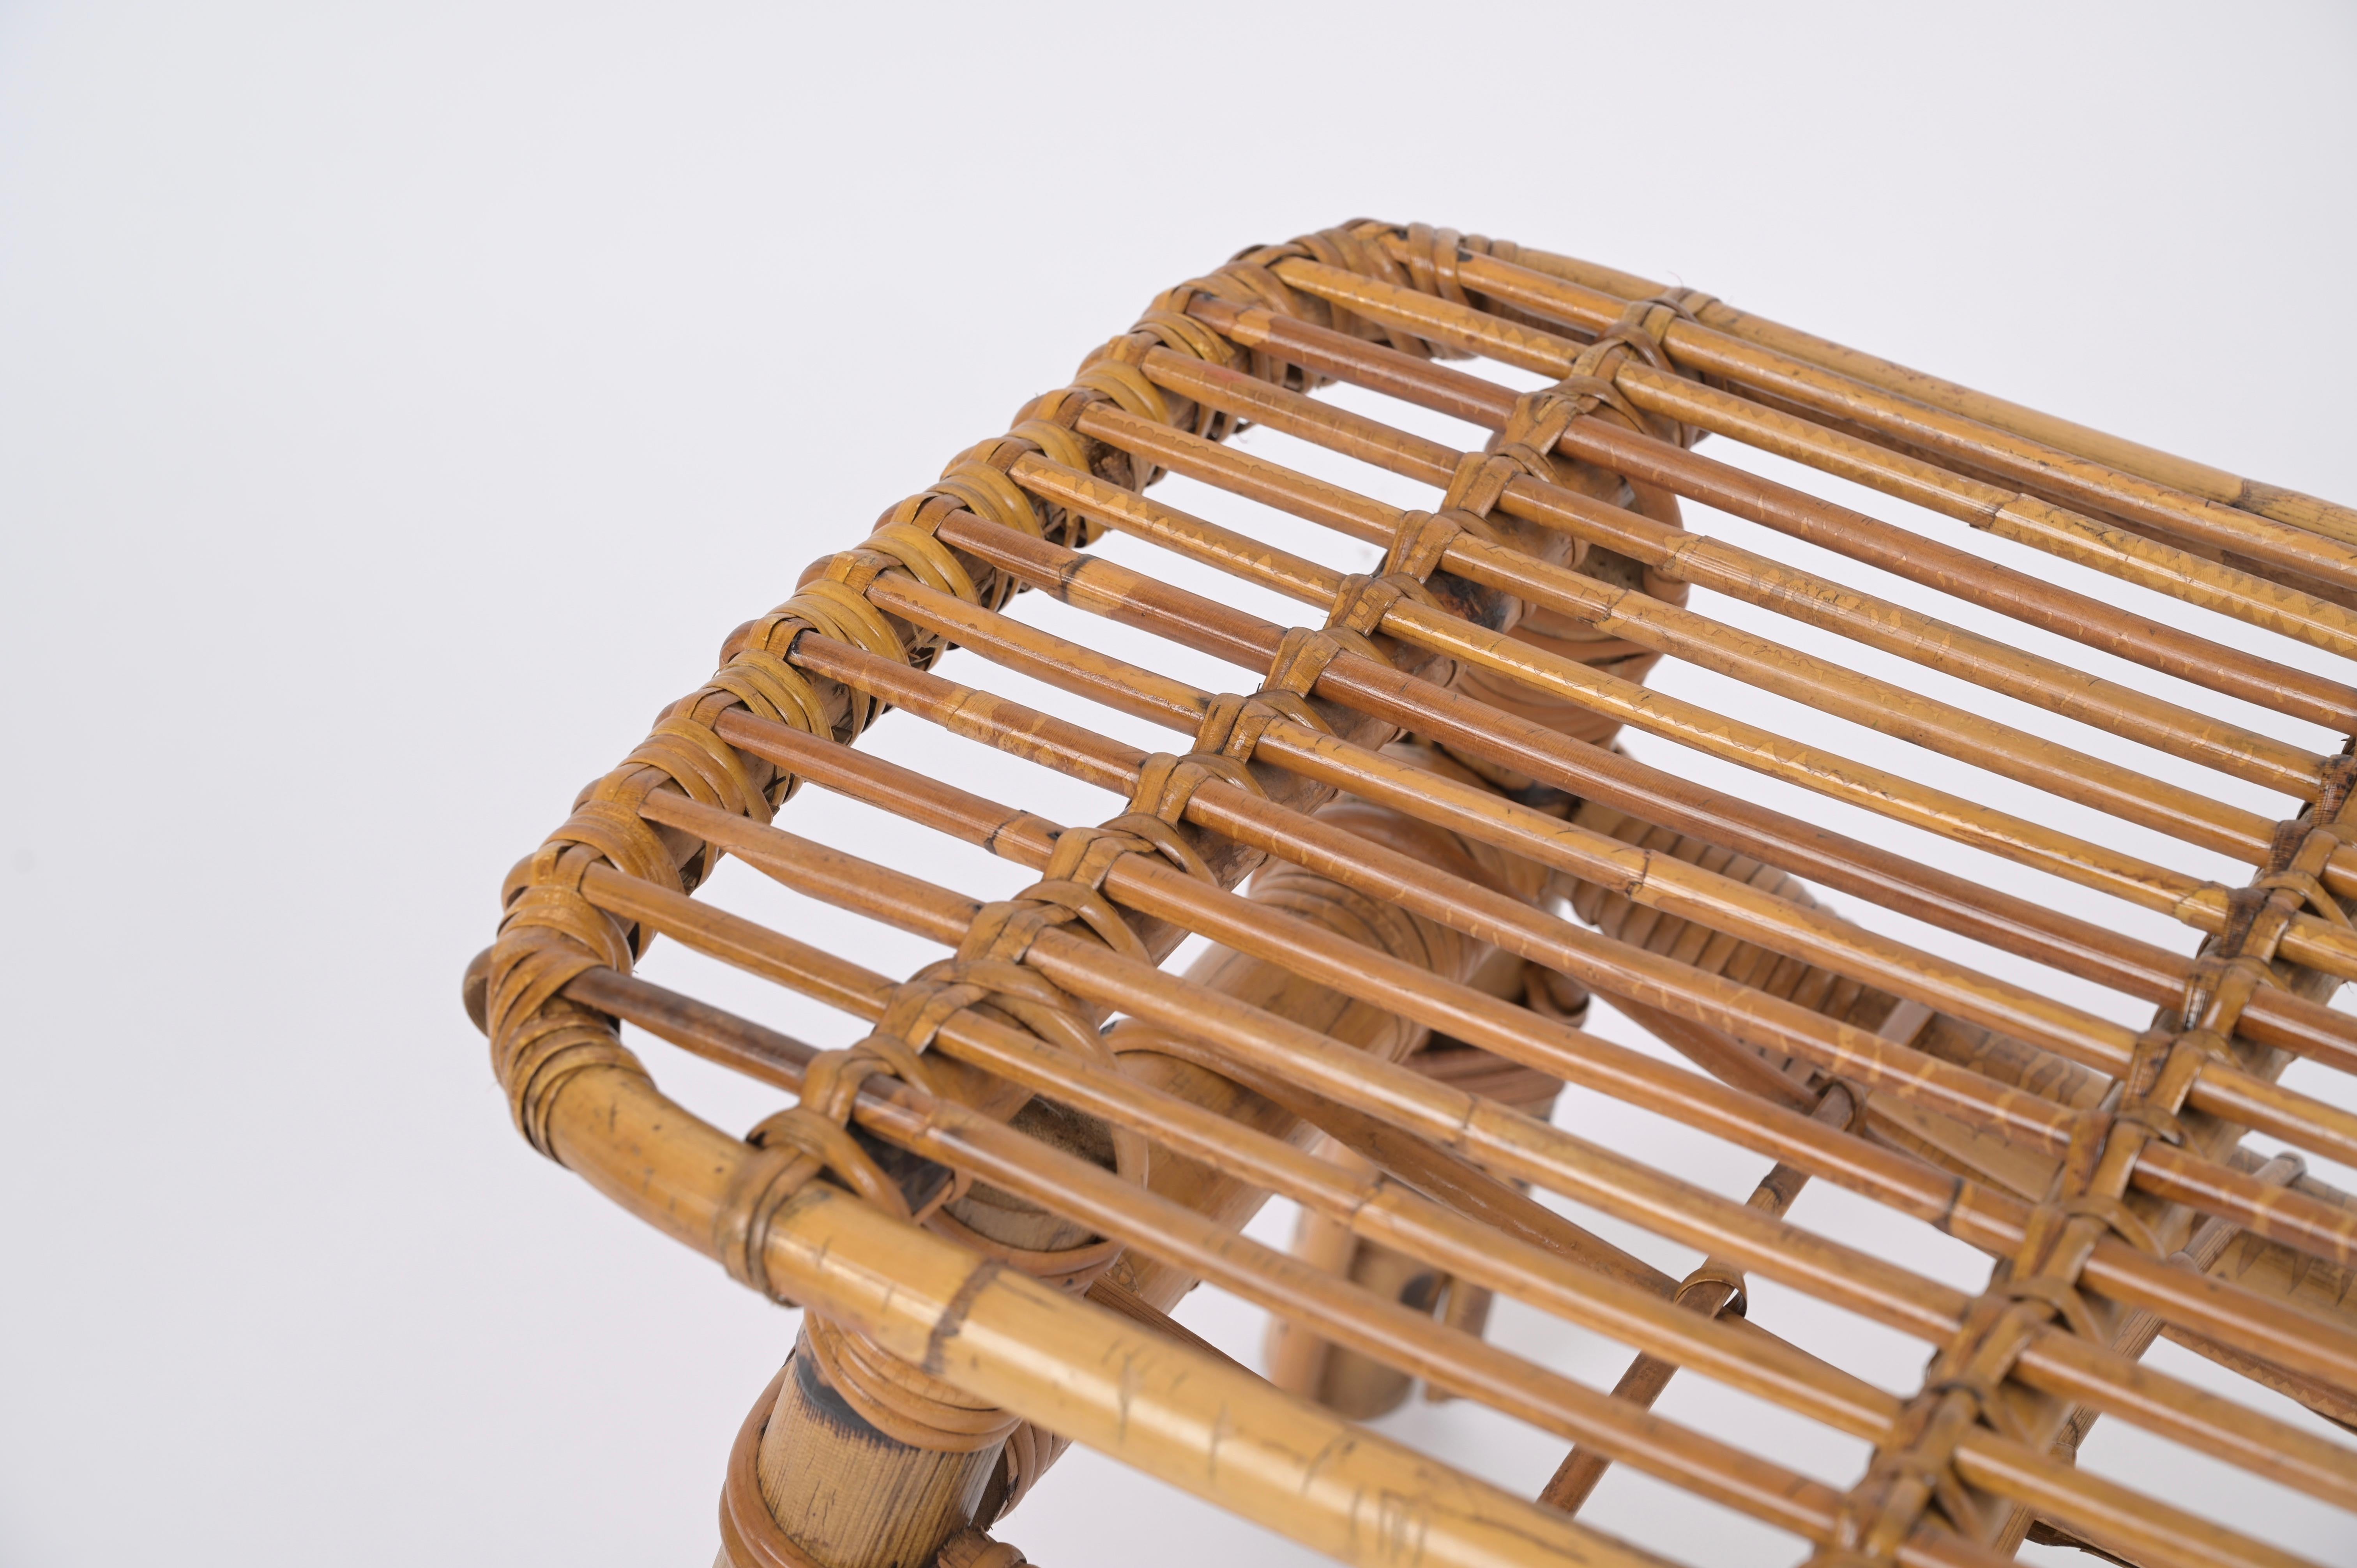 Italian Coffee Table or Bench in Rattan and Wicker by Tito Agnoli, 1960s For Sale 5